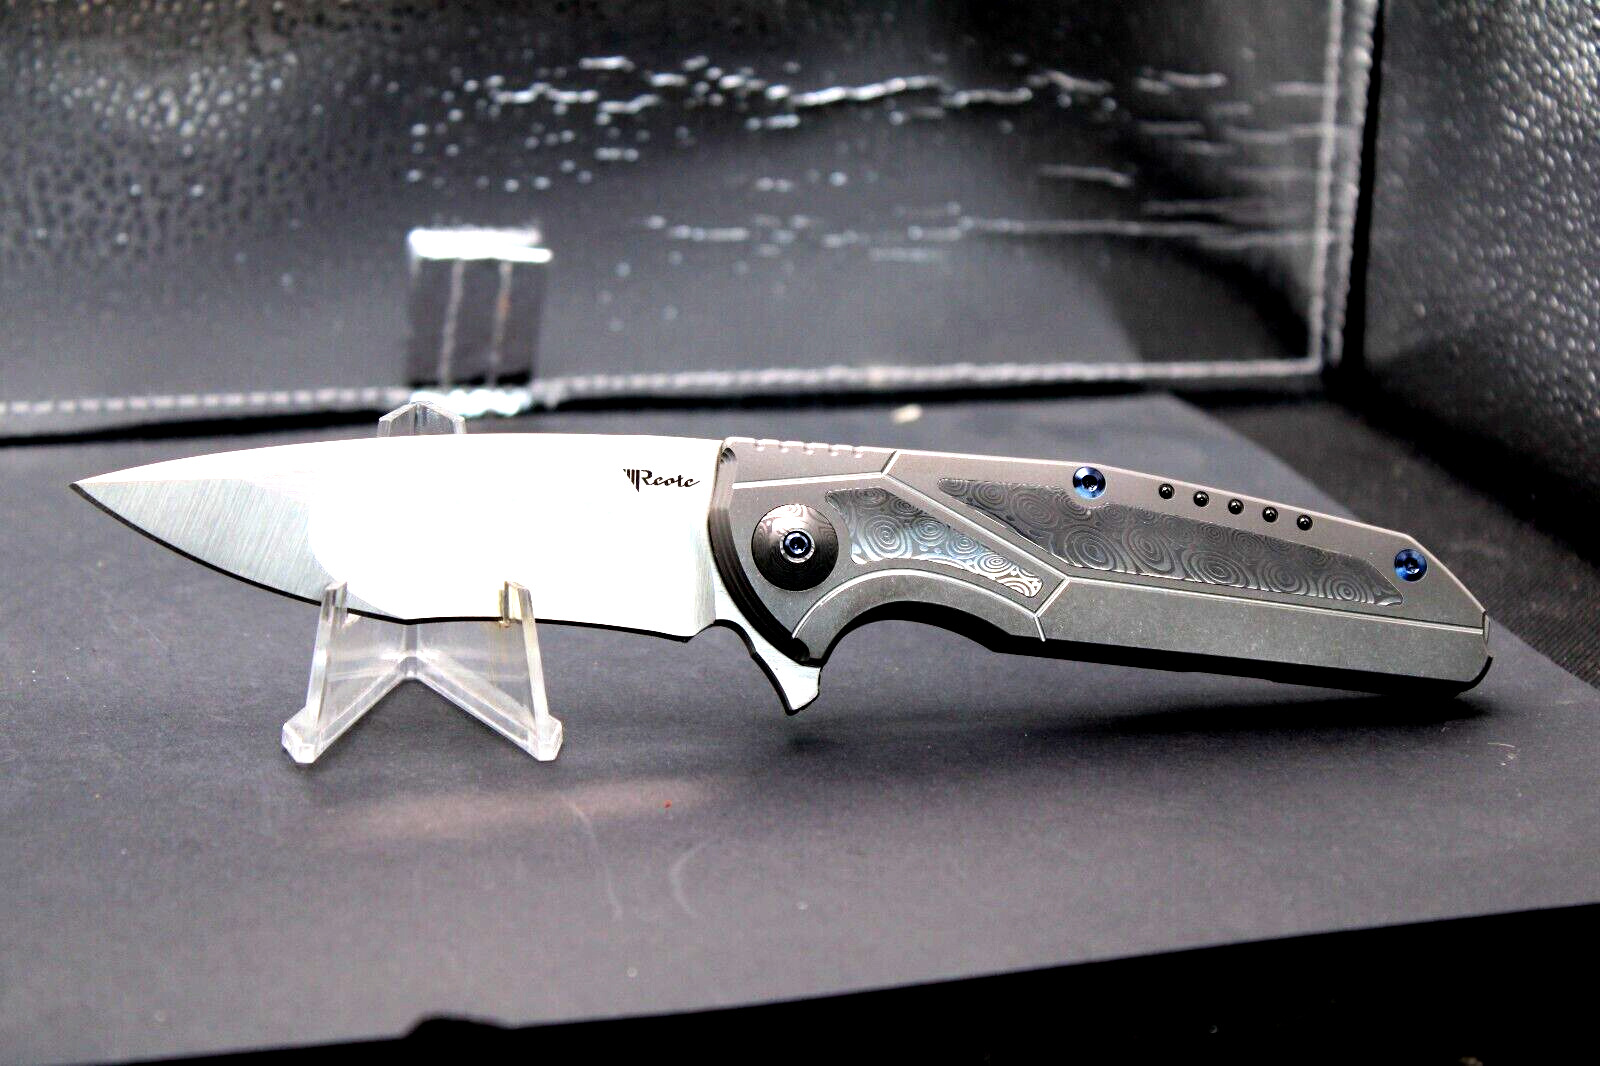 Reate K-4 Satin Hollow Grd M390, TI w/damascus inlays and blue hardware. Unused